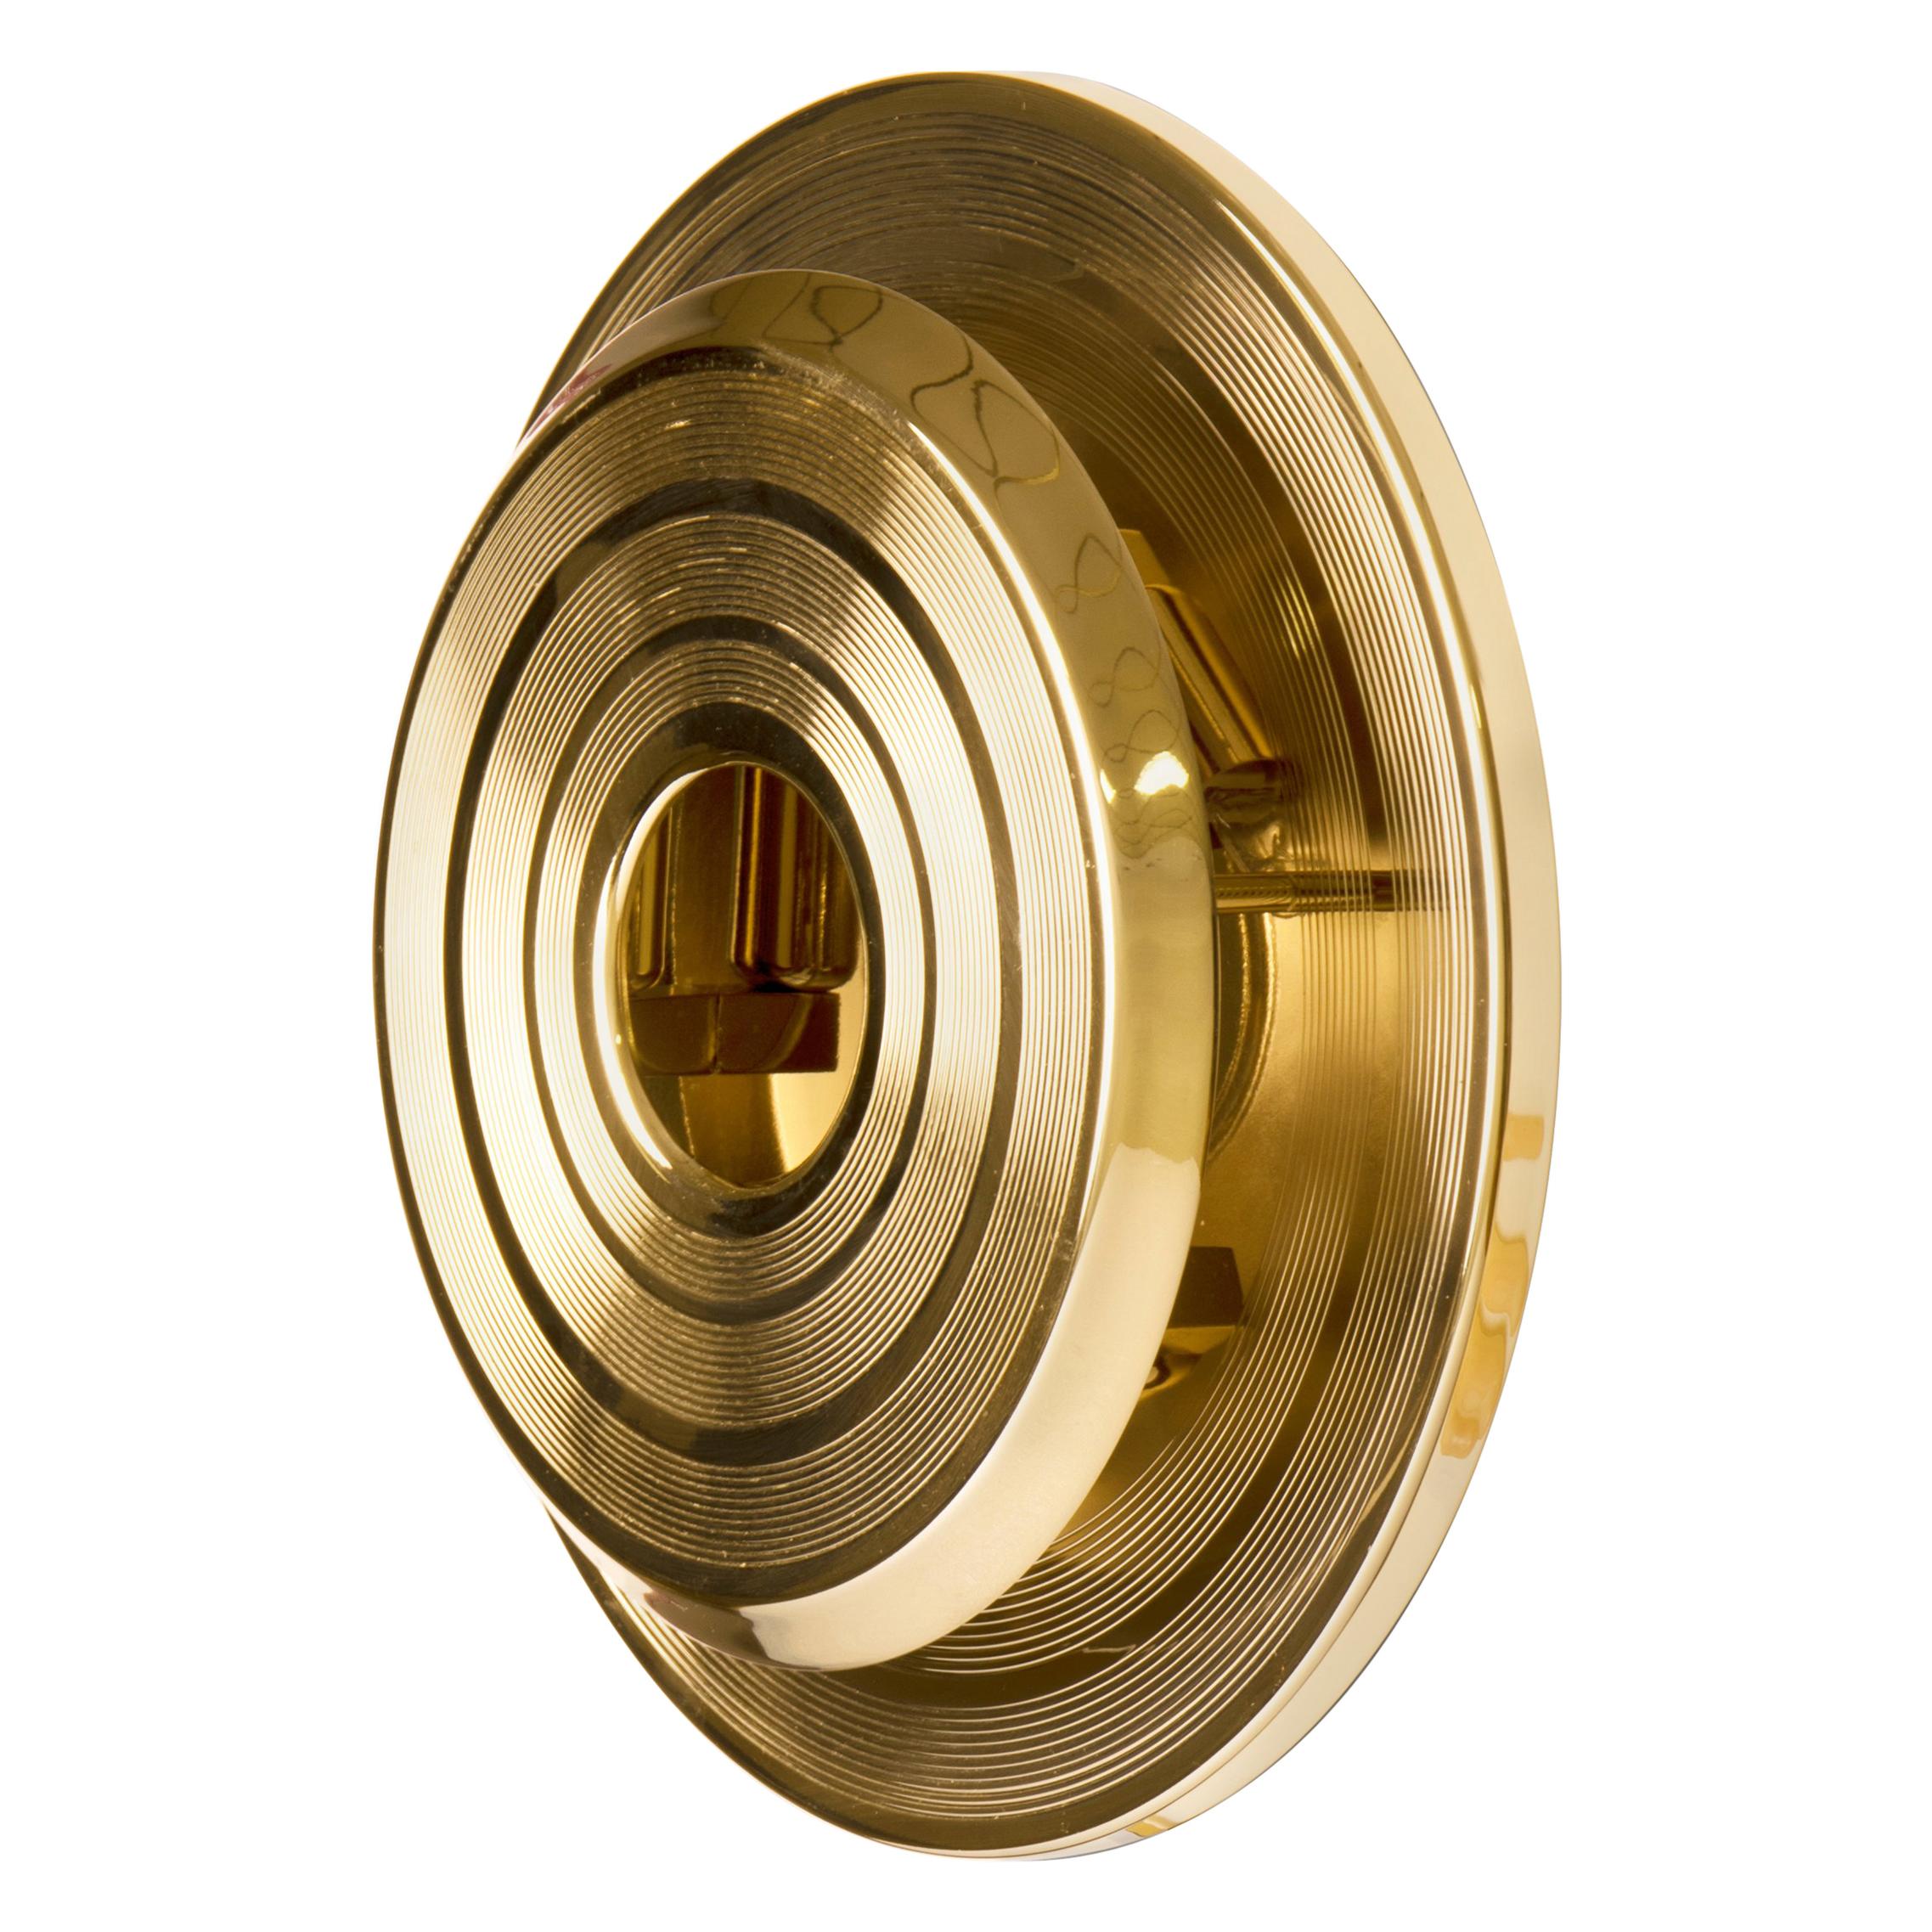 Hendrix Round Wall Light in Brass with Gold-Plated Finish im Angebot